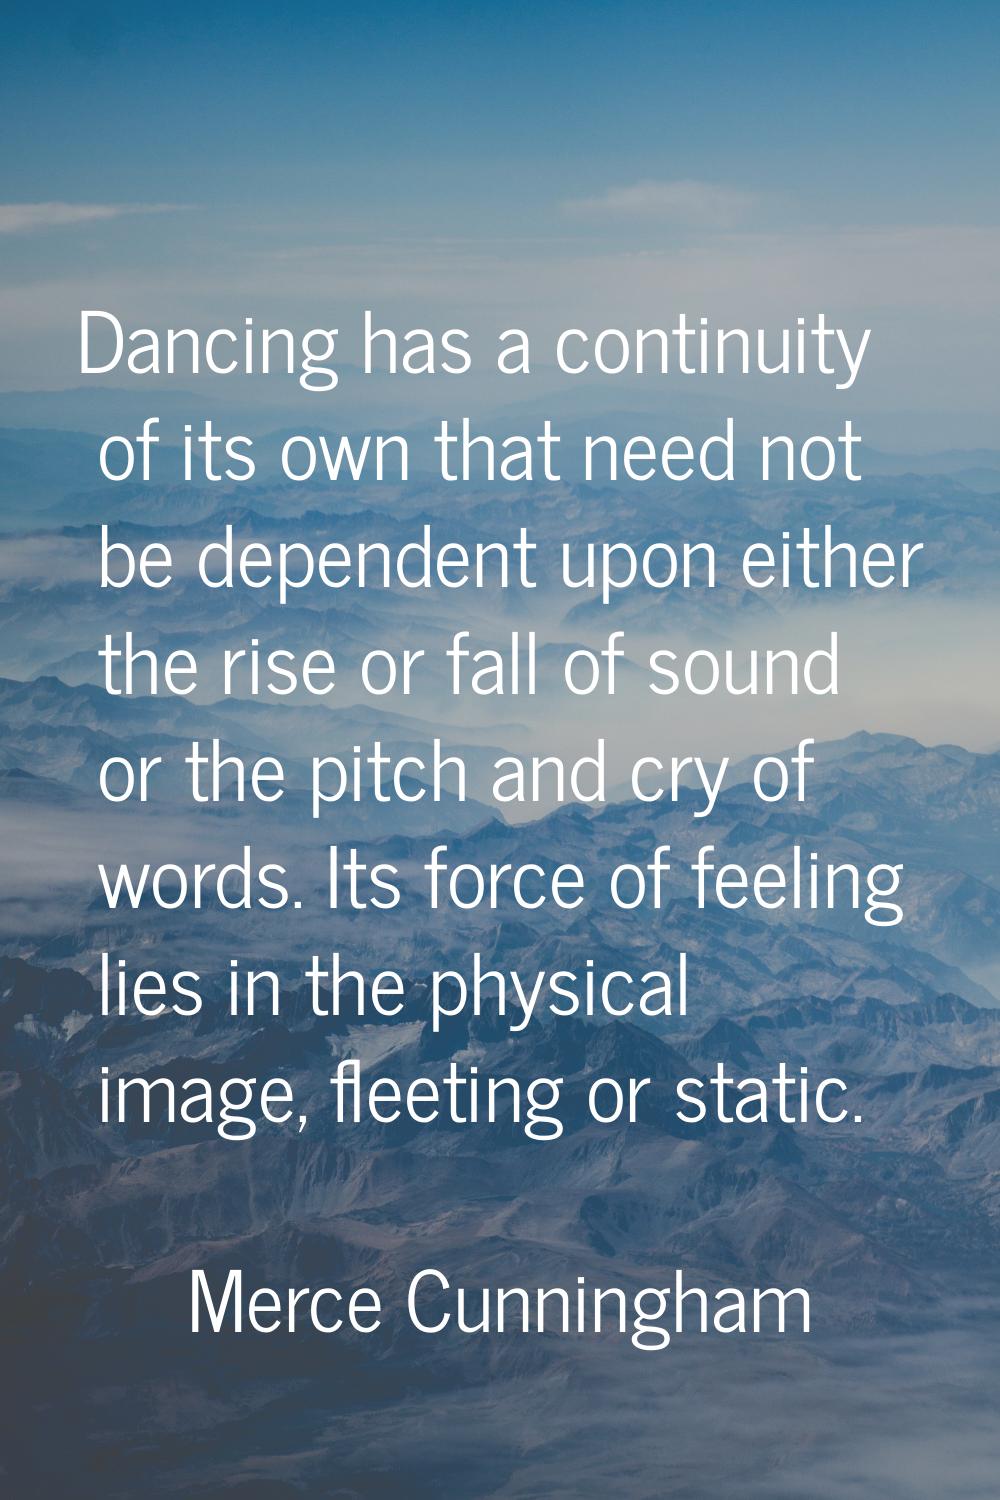 Dancing has a continuity of its own that need not be dependent upon either the rise or fall of soun